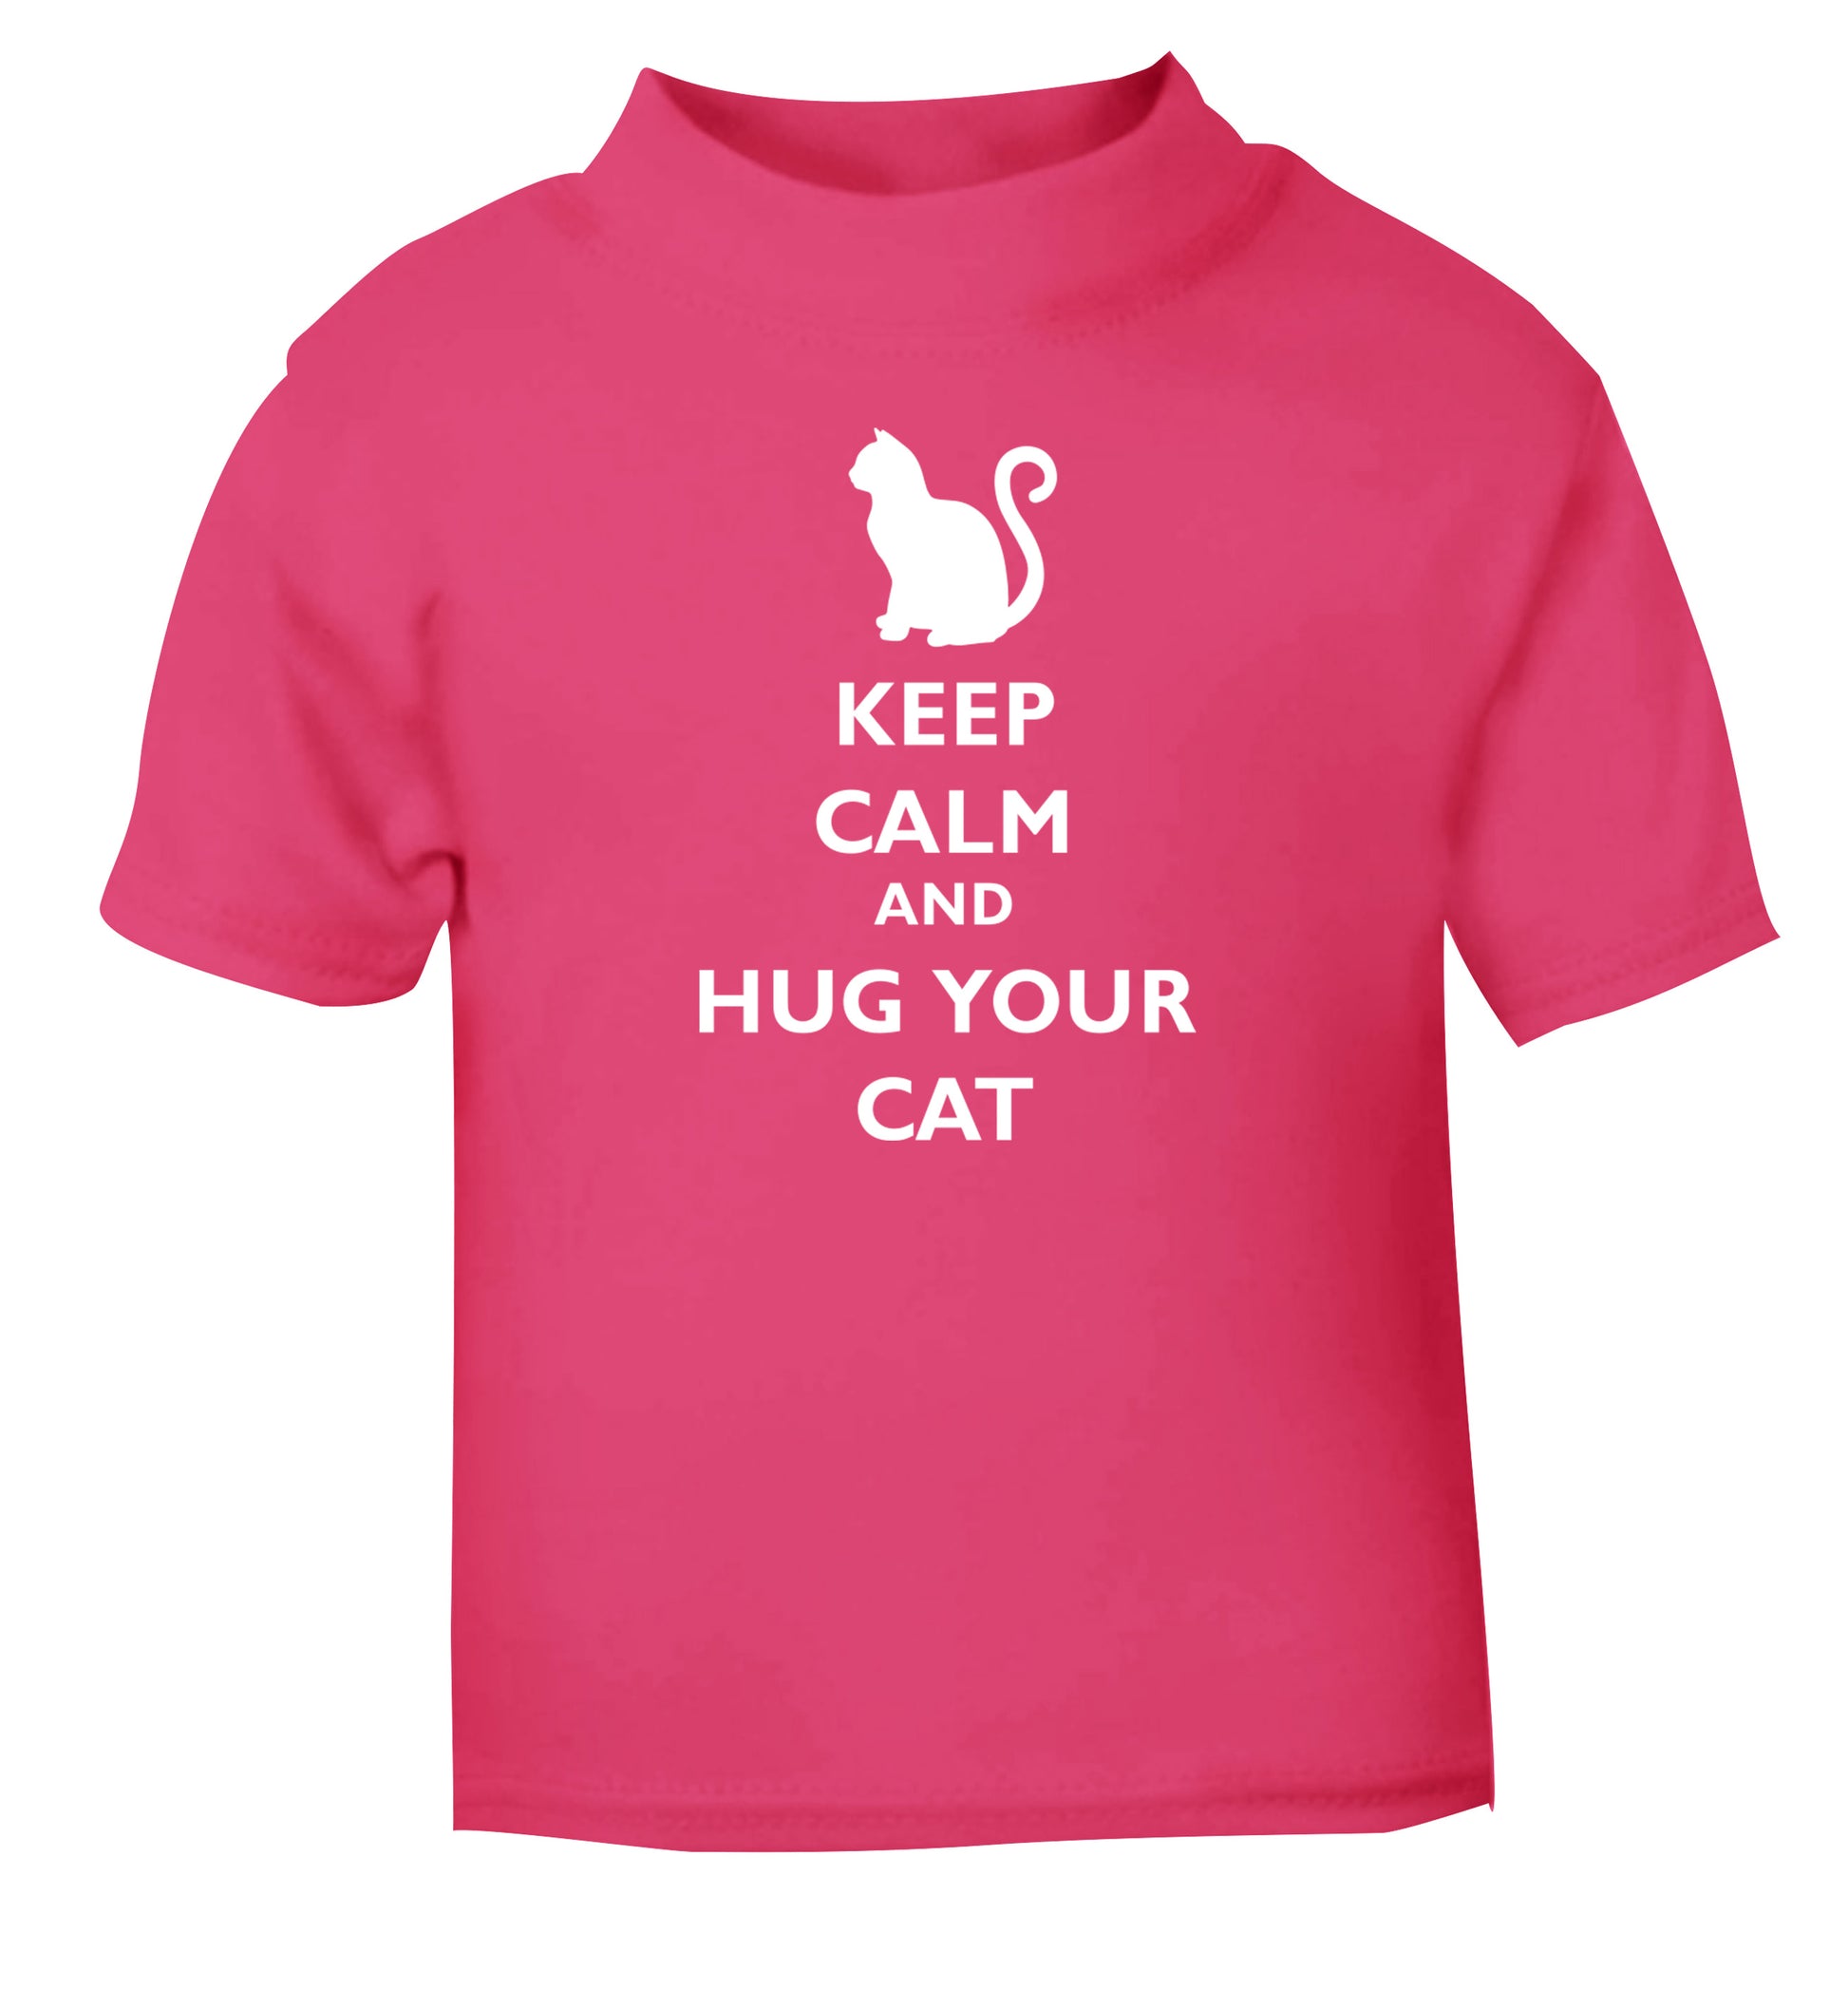 Keep calm and hug your cat pink Baby Toddler Tshirt 2 Years